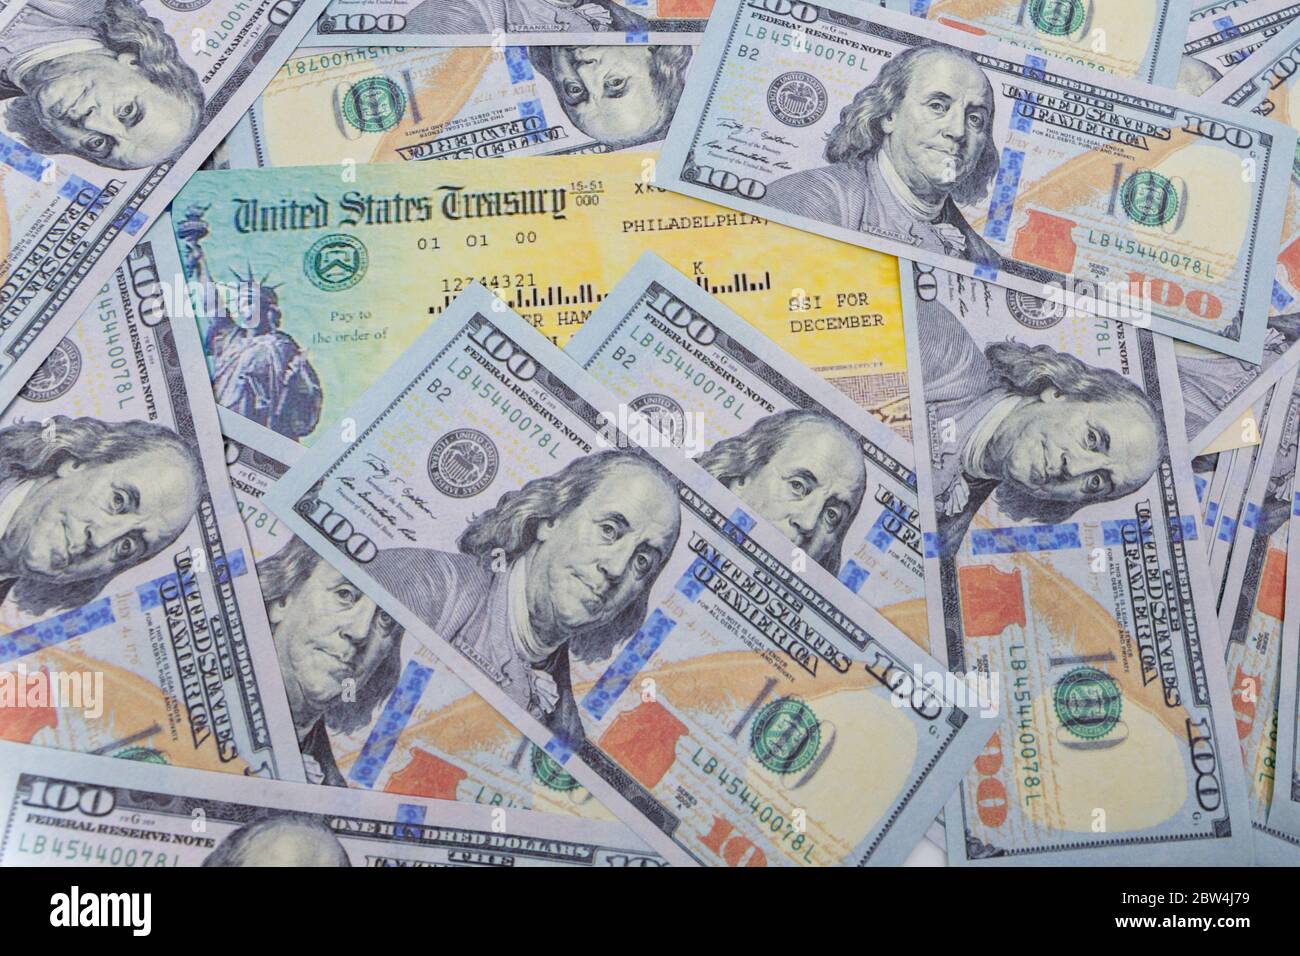 Stack of 100 dollar bills with coronavirus stimulus payment check to show the virus payment to Americans. Concept IRS tax refund or coronavirus stimul Stock Photo